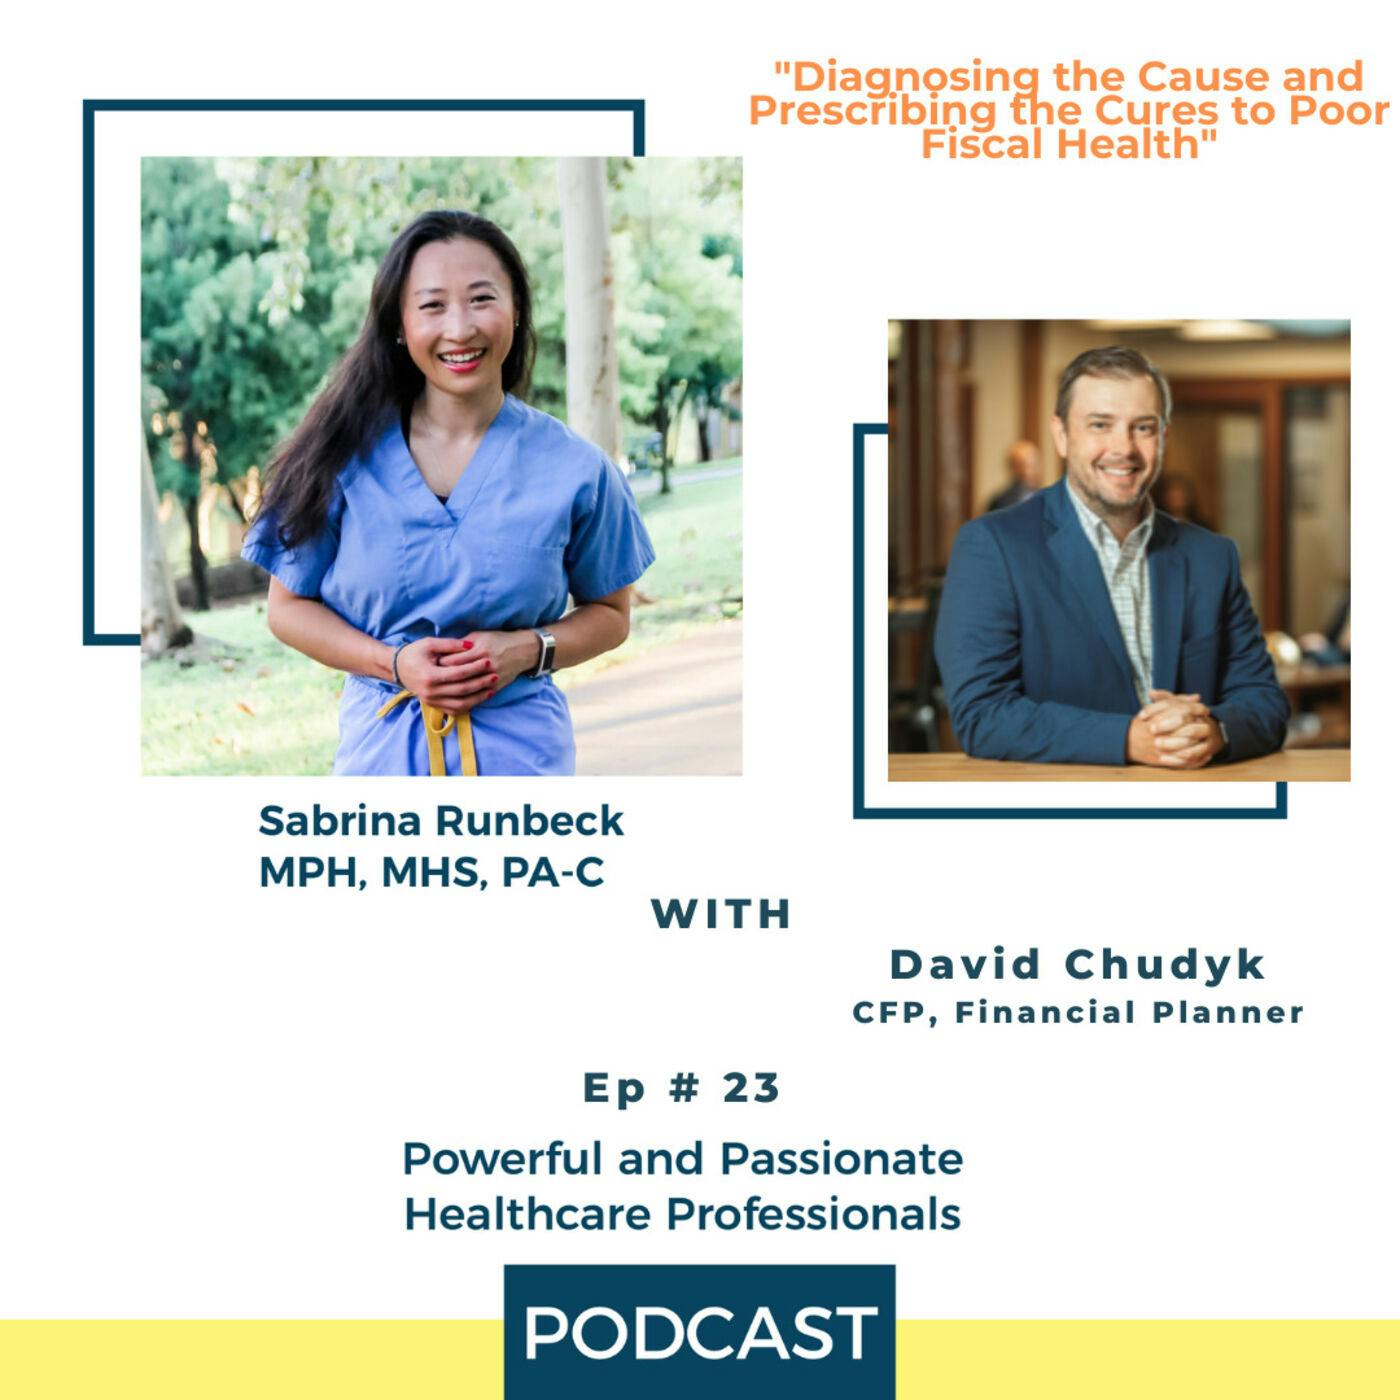 Ep 23 –  Diagnosing the Causes and Prescribing the Cures to Poor Fiscal Health with David Chudyk